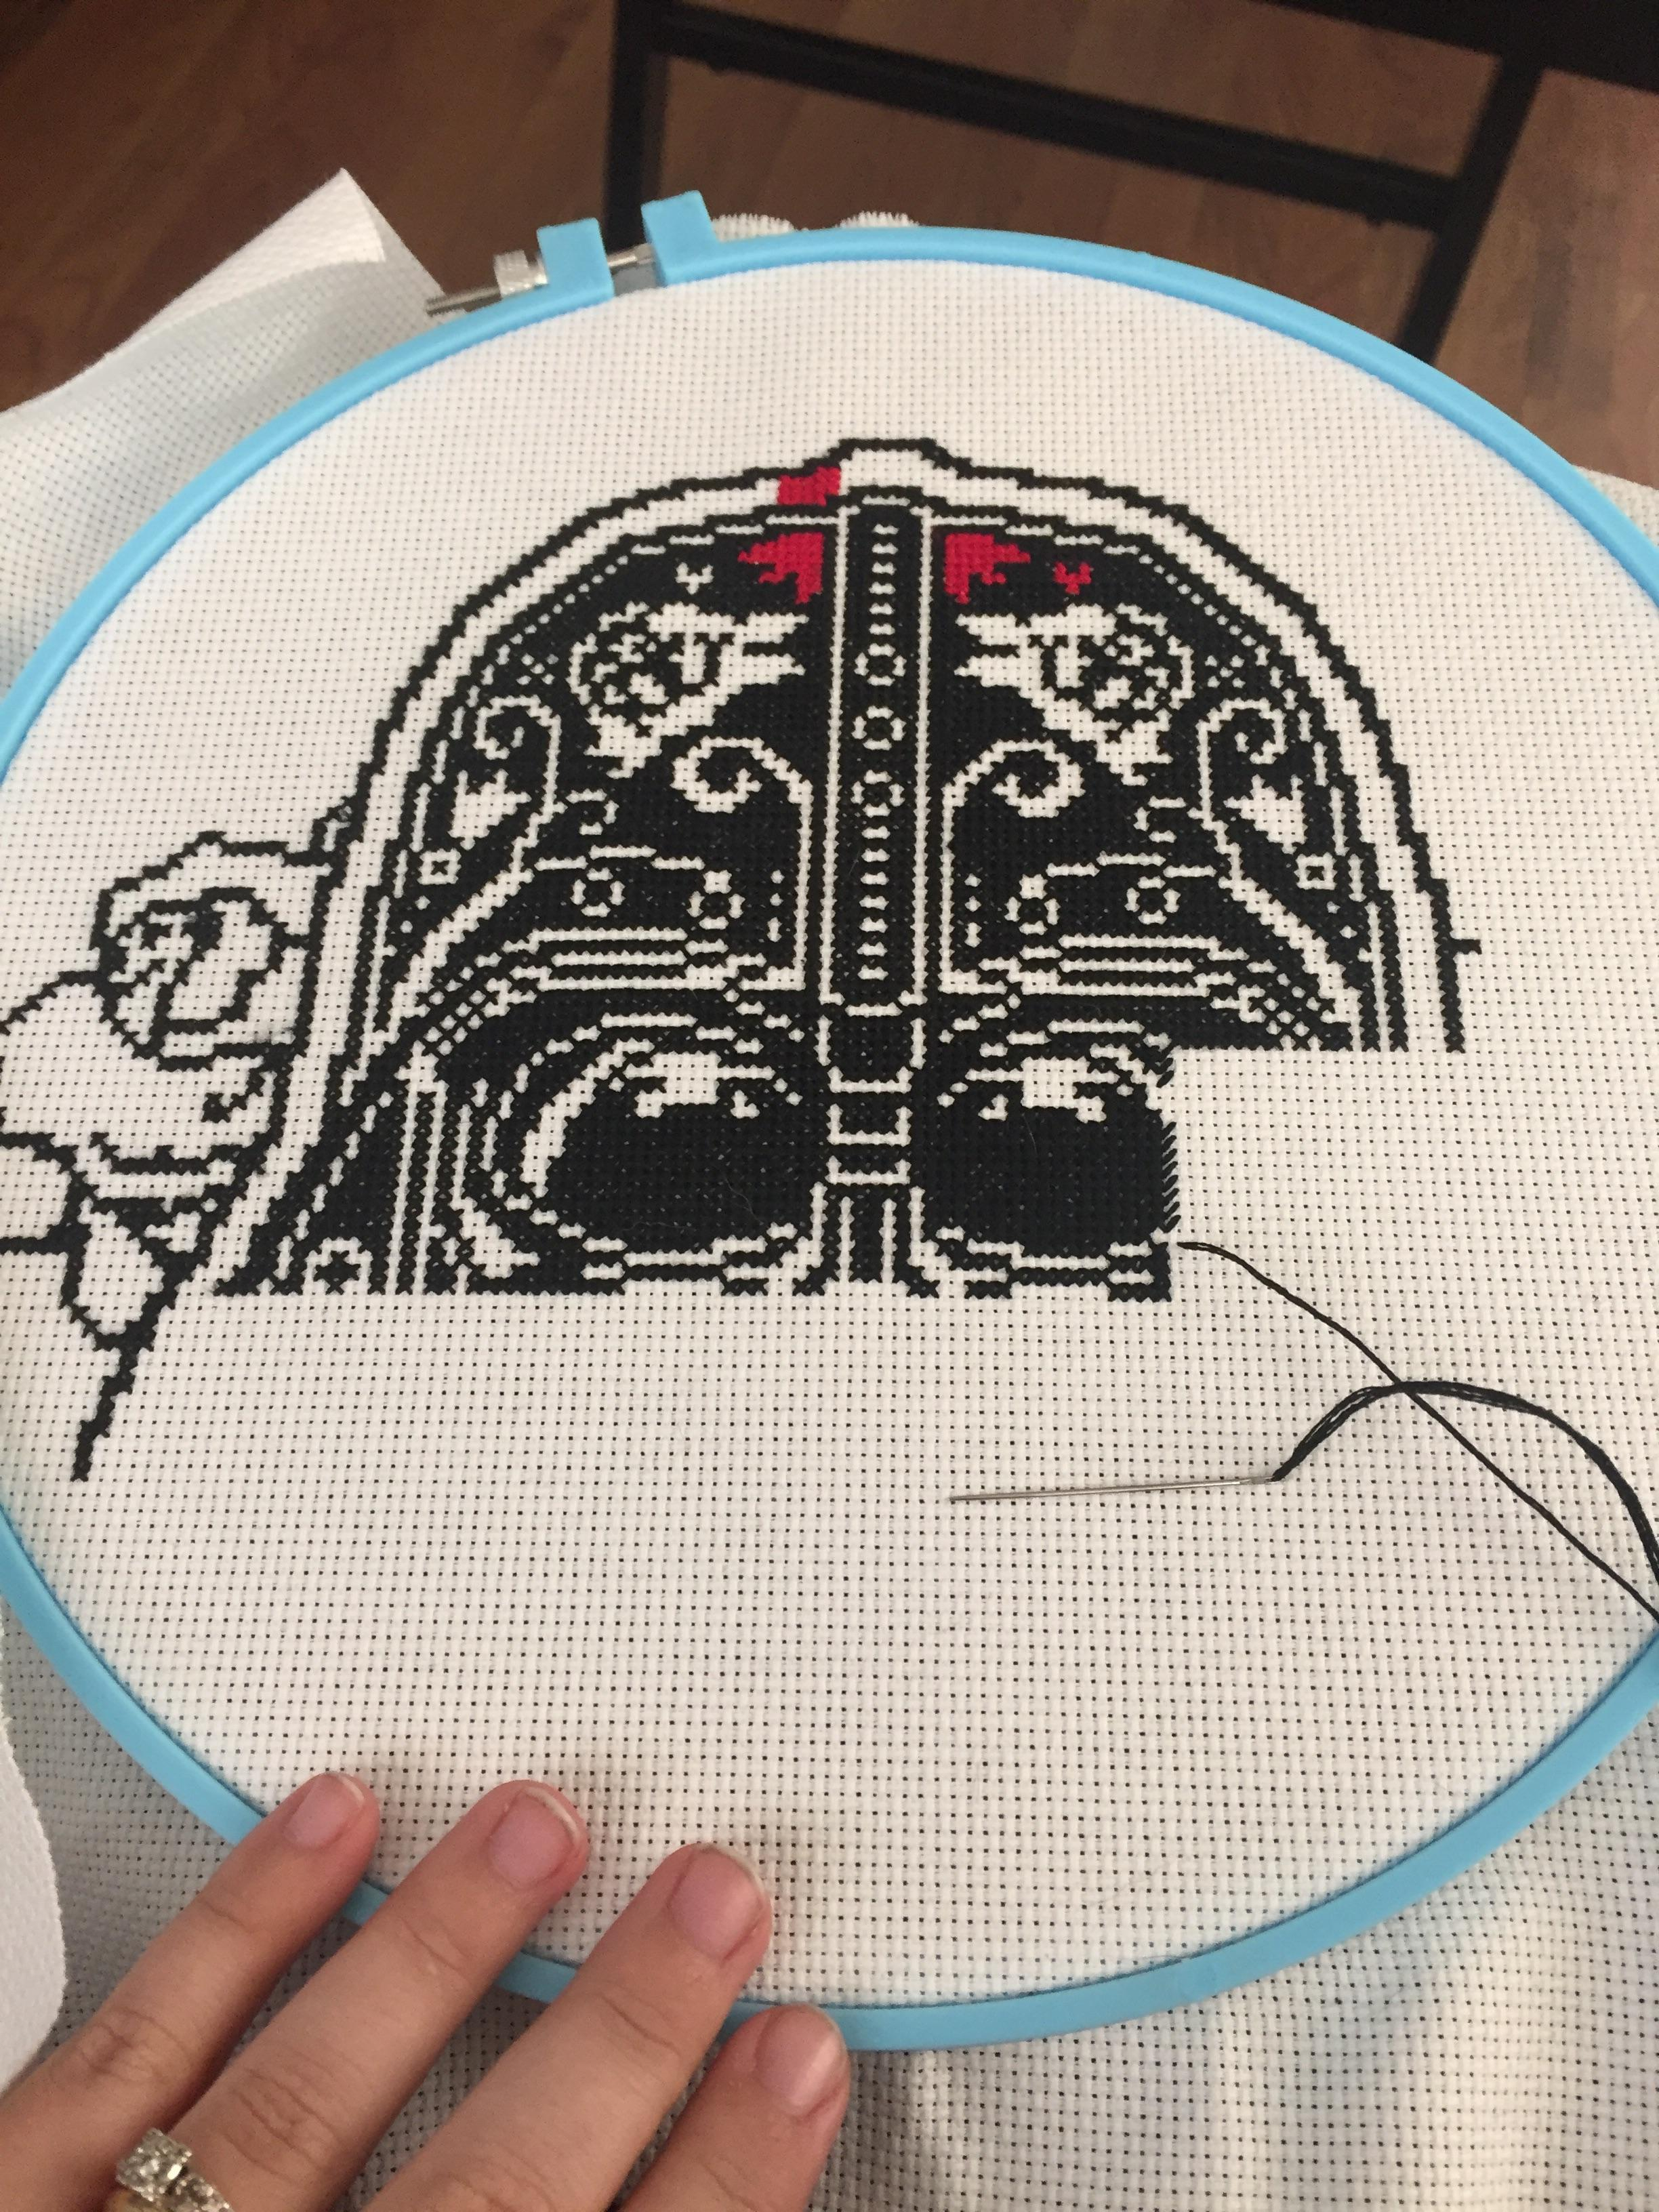 Day Of The Dead Embroidery Patterns Wip Day Of The Dead Darth Vader A Months Worth Of Progress